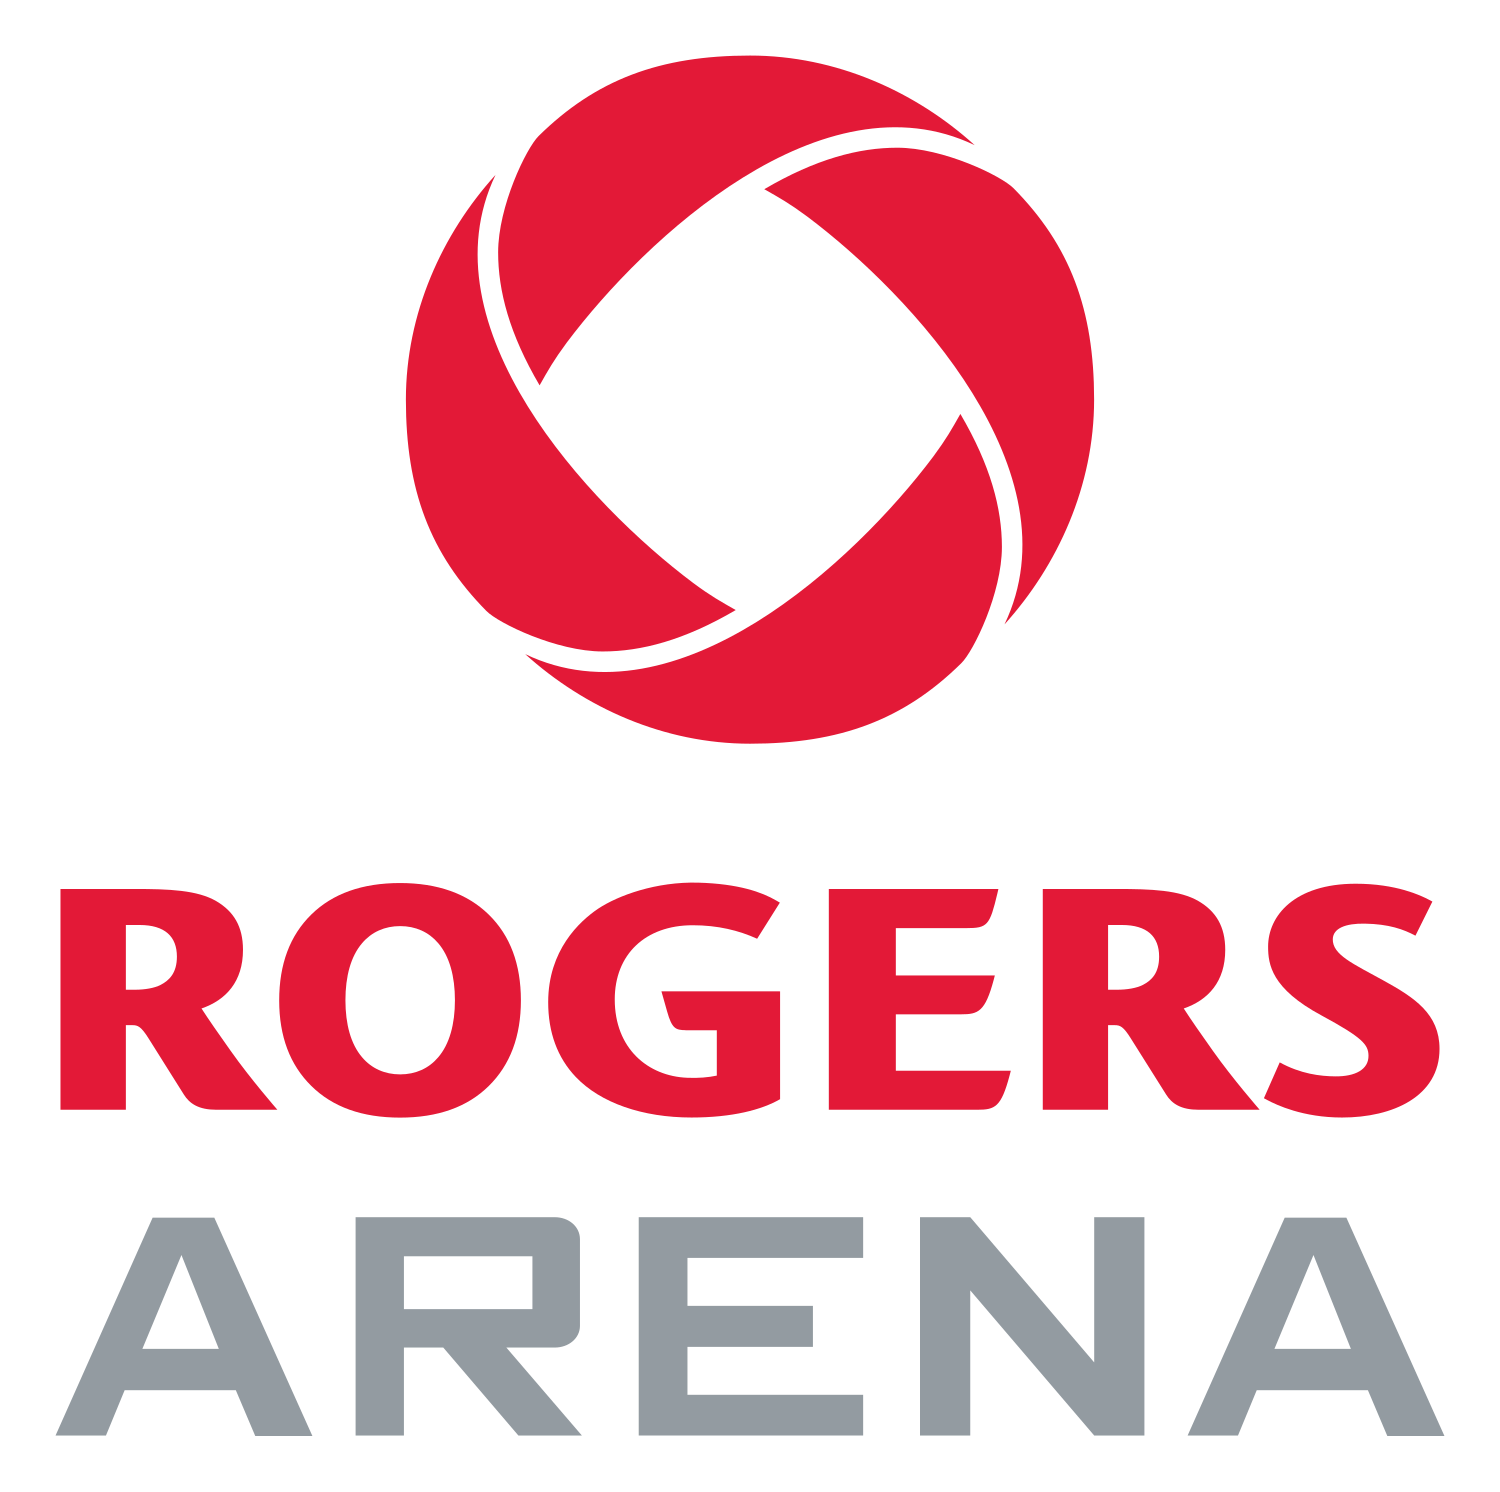 Rogers Place Canada's First NHL Arena Built to LEED Silver